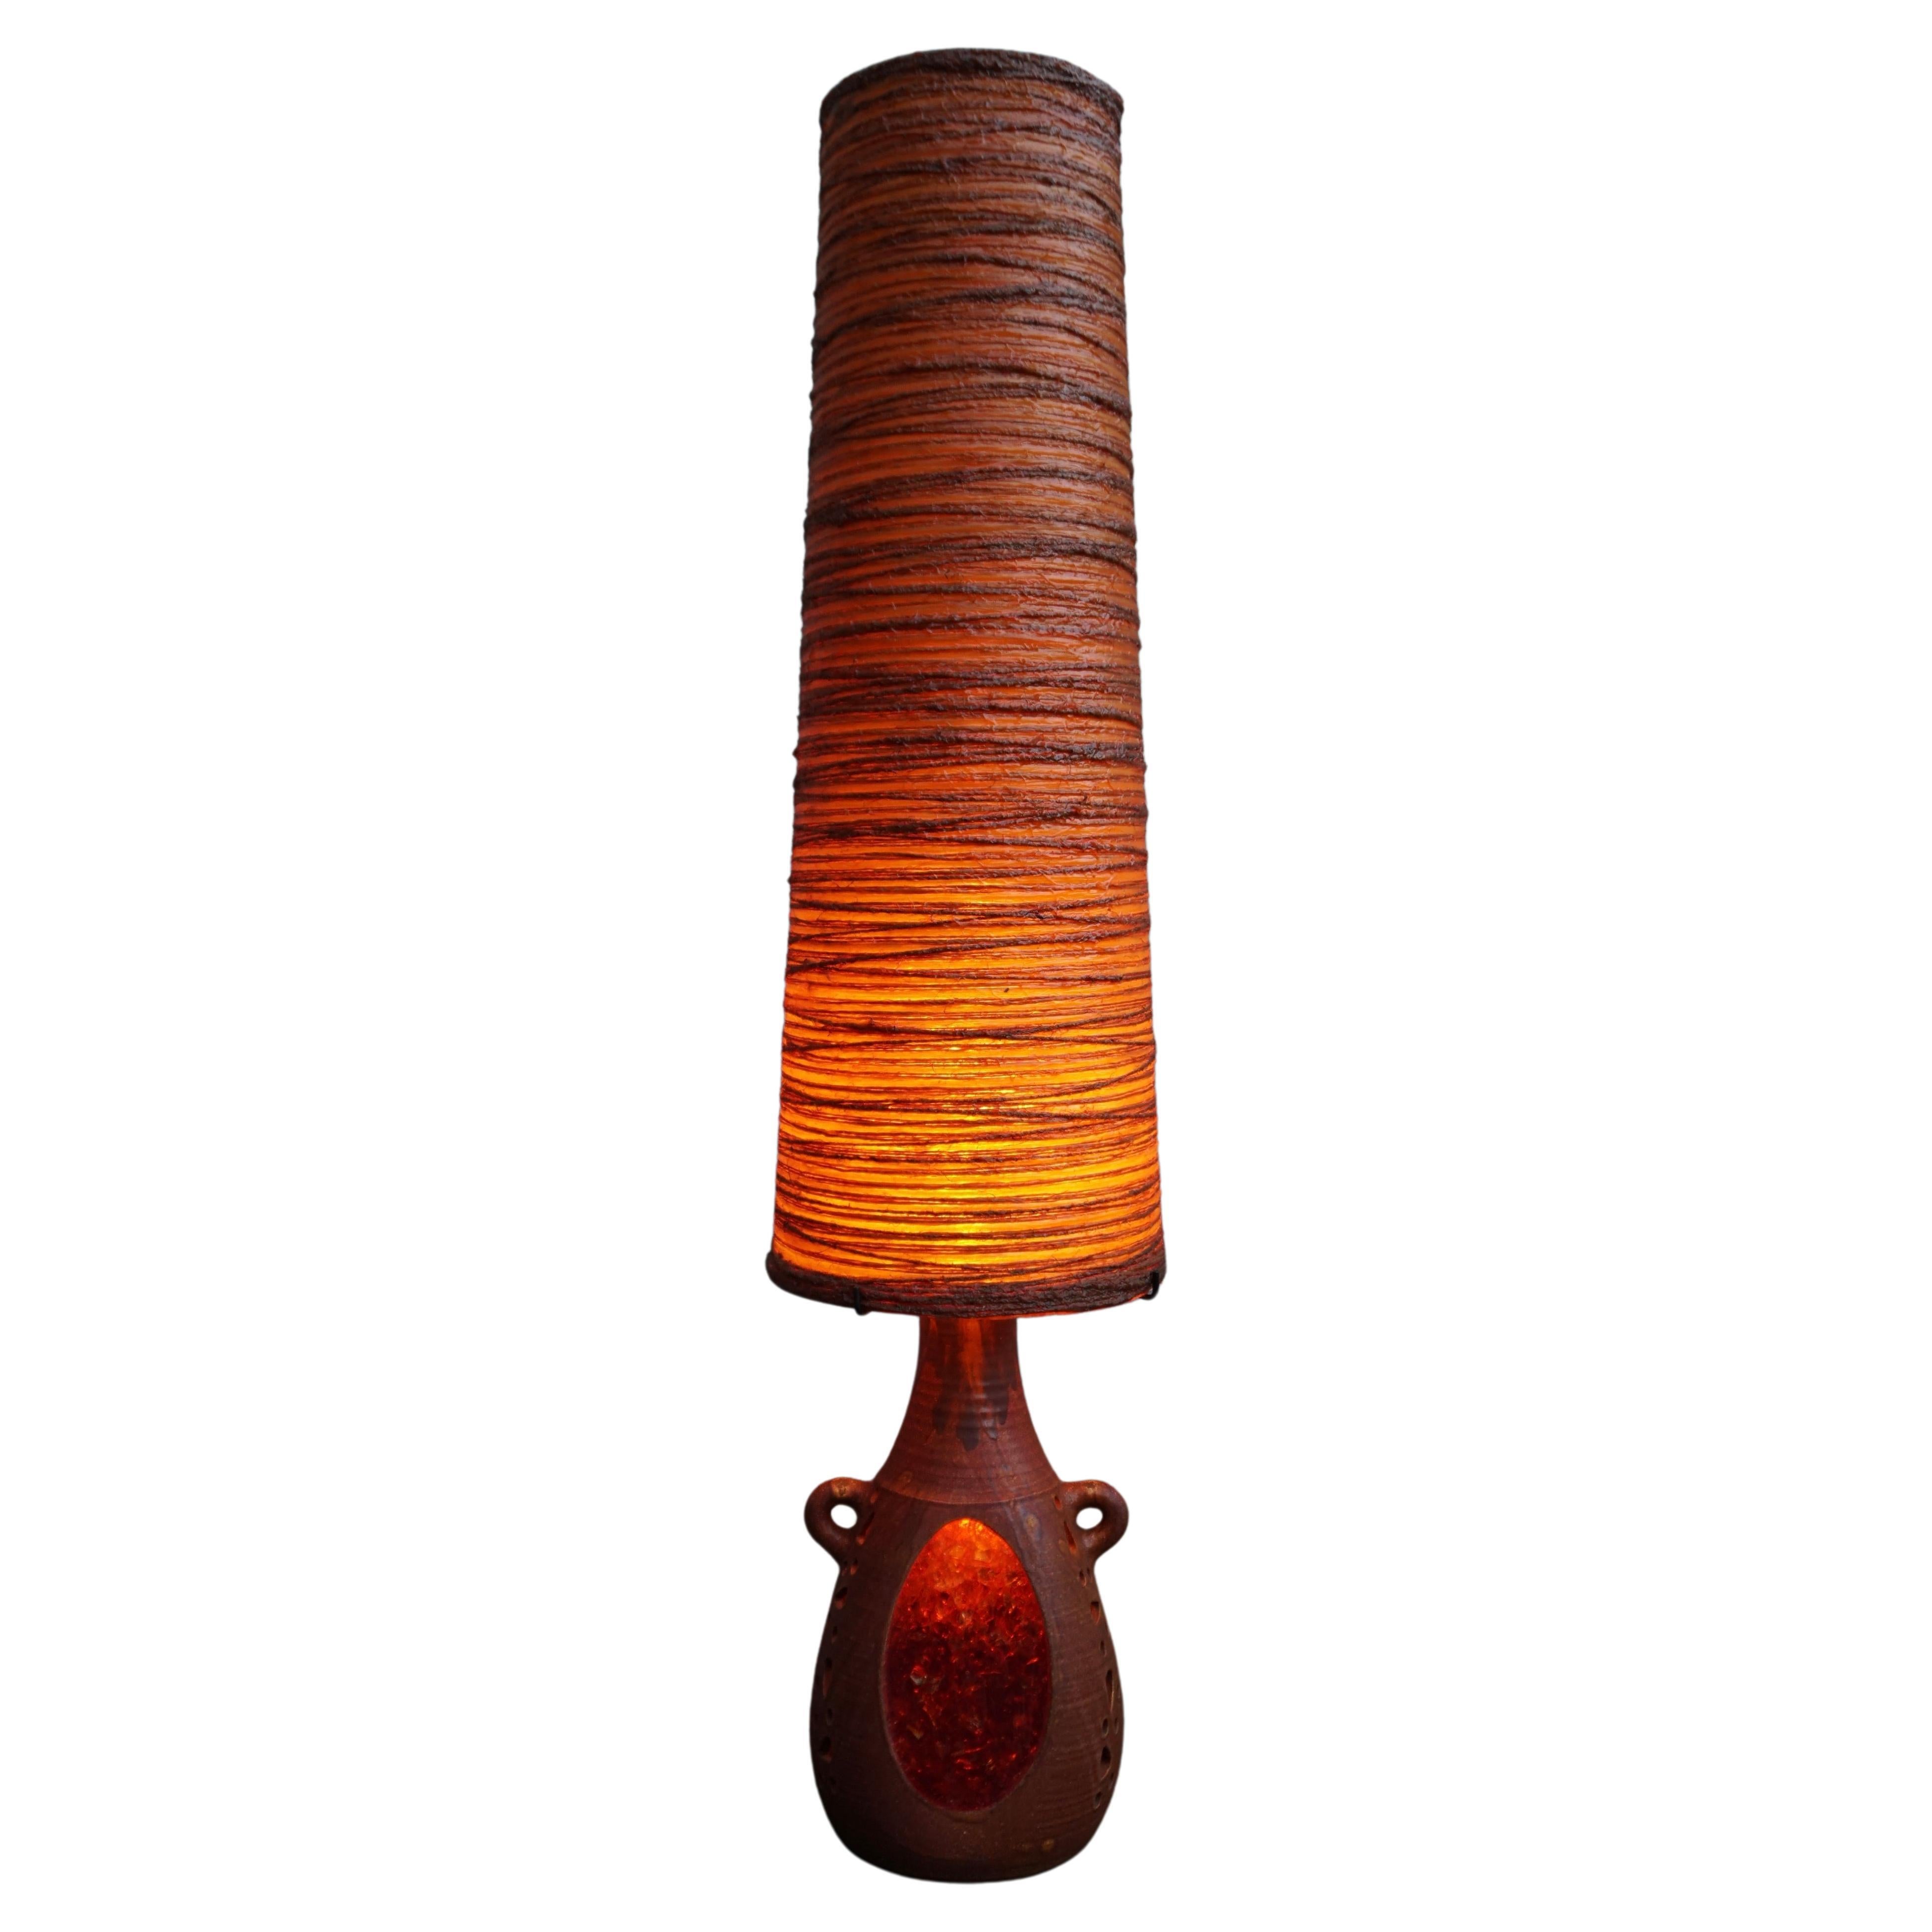 Important double-light accolay lamp. Ceramic base, raffia lampshade encased in resin. 

Shade: height 89 cm, shade bottom diameter 30 cm. 
Total height with shade: 133 cm.